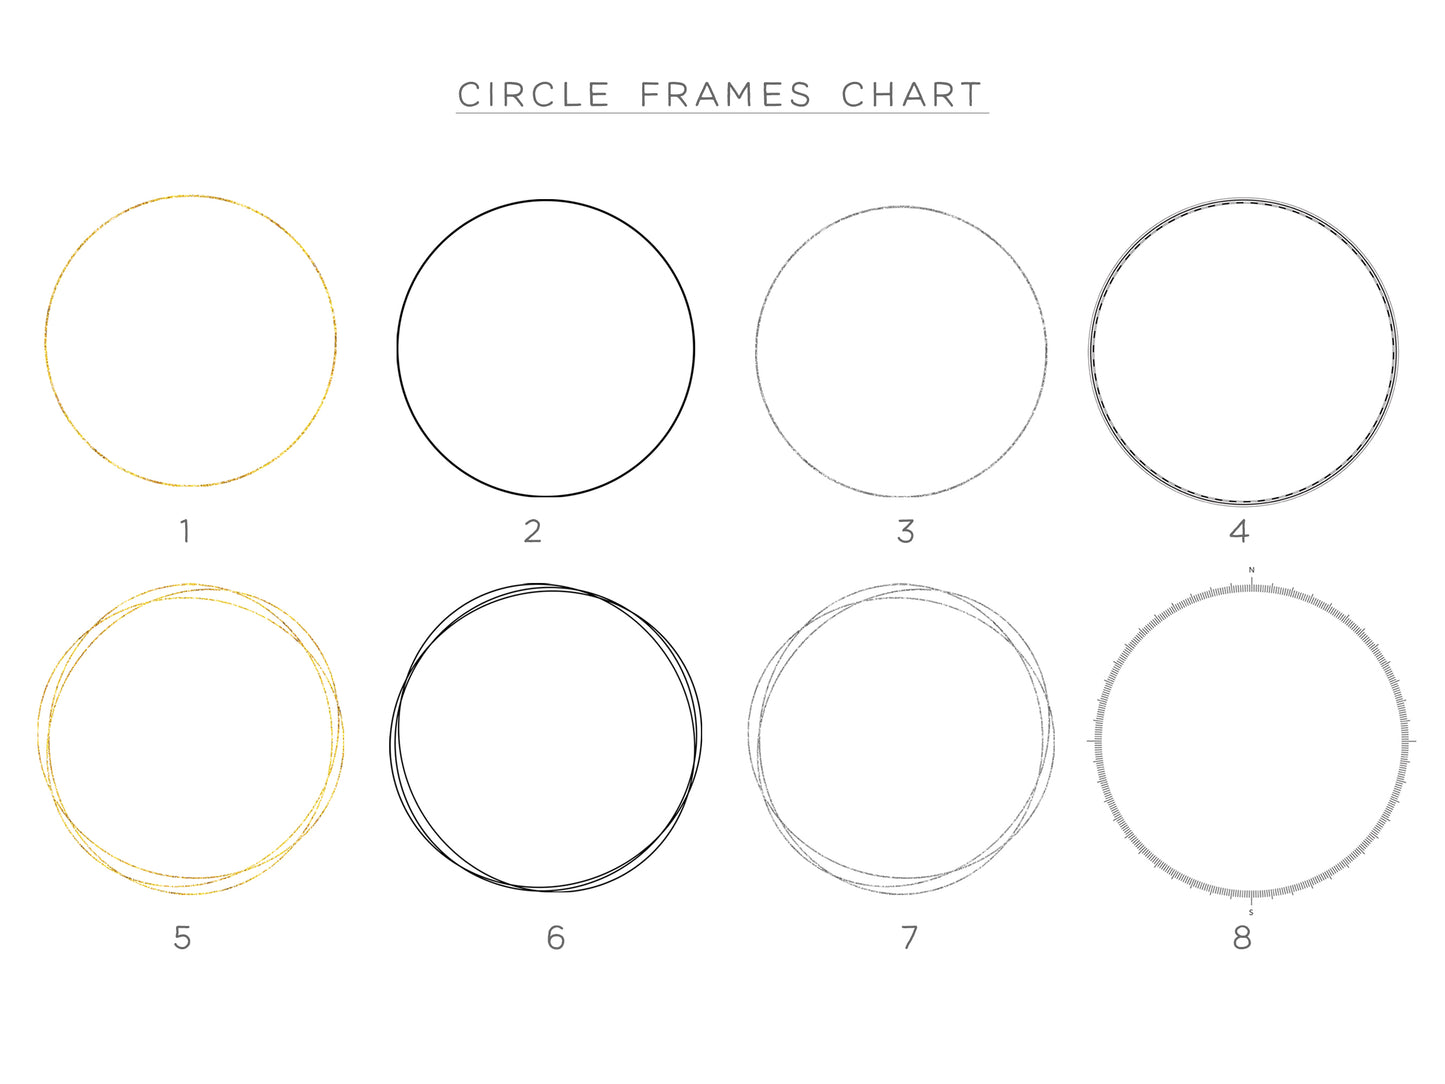 a circle frames chart with different sizes and colors